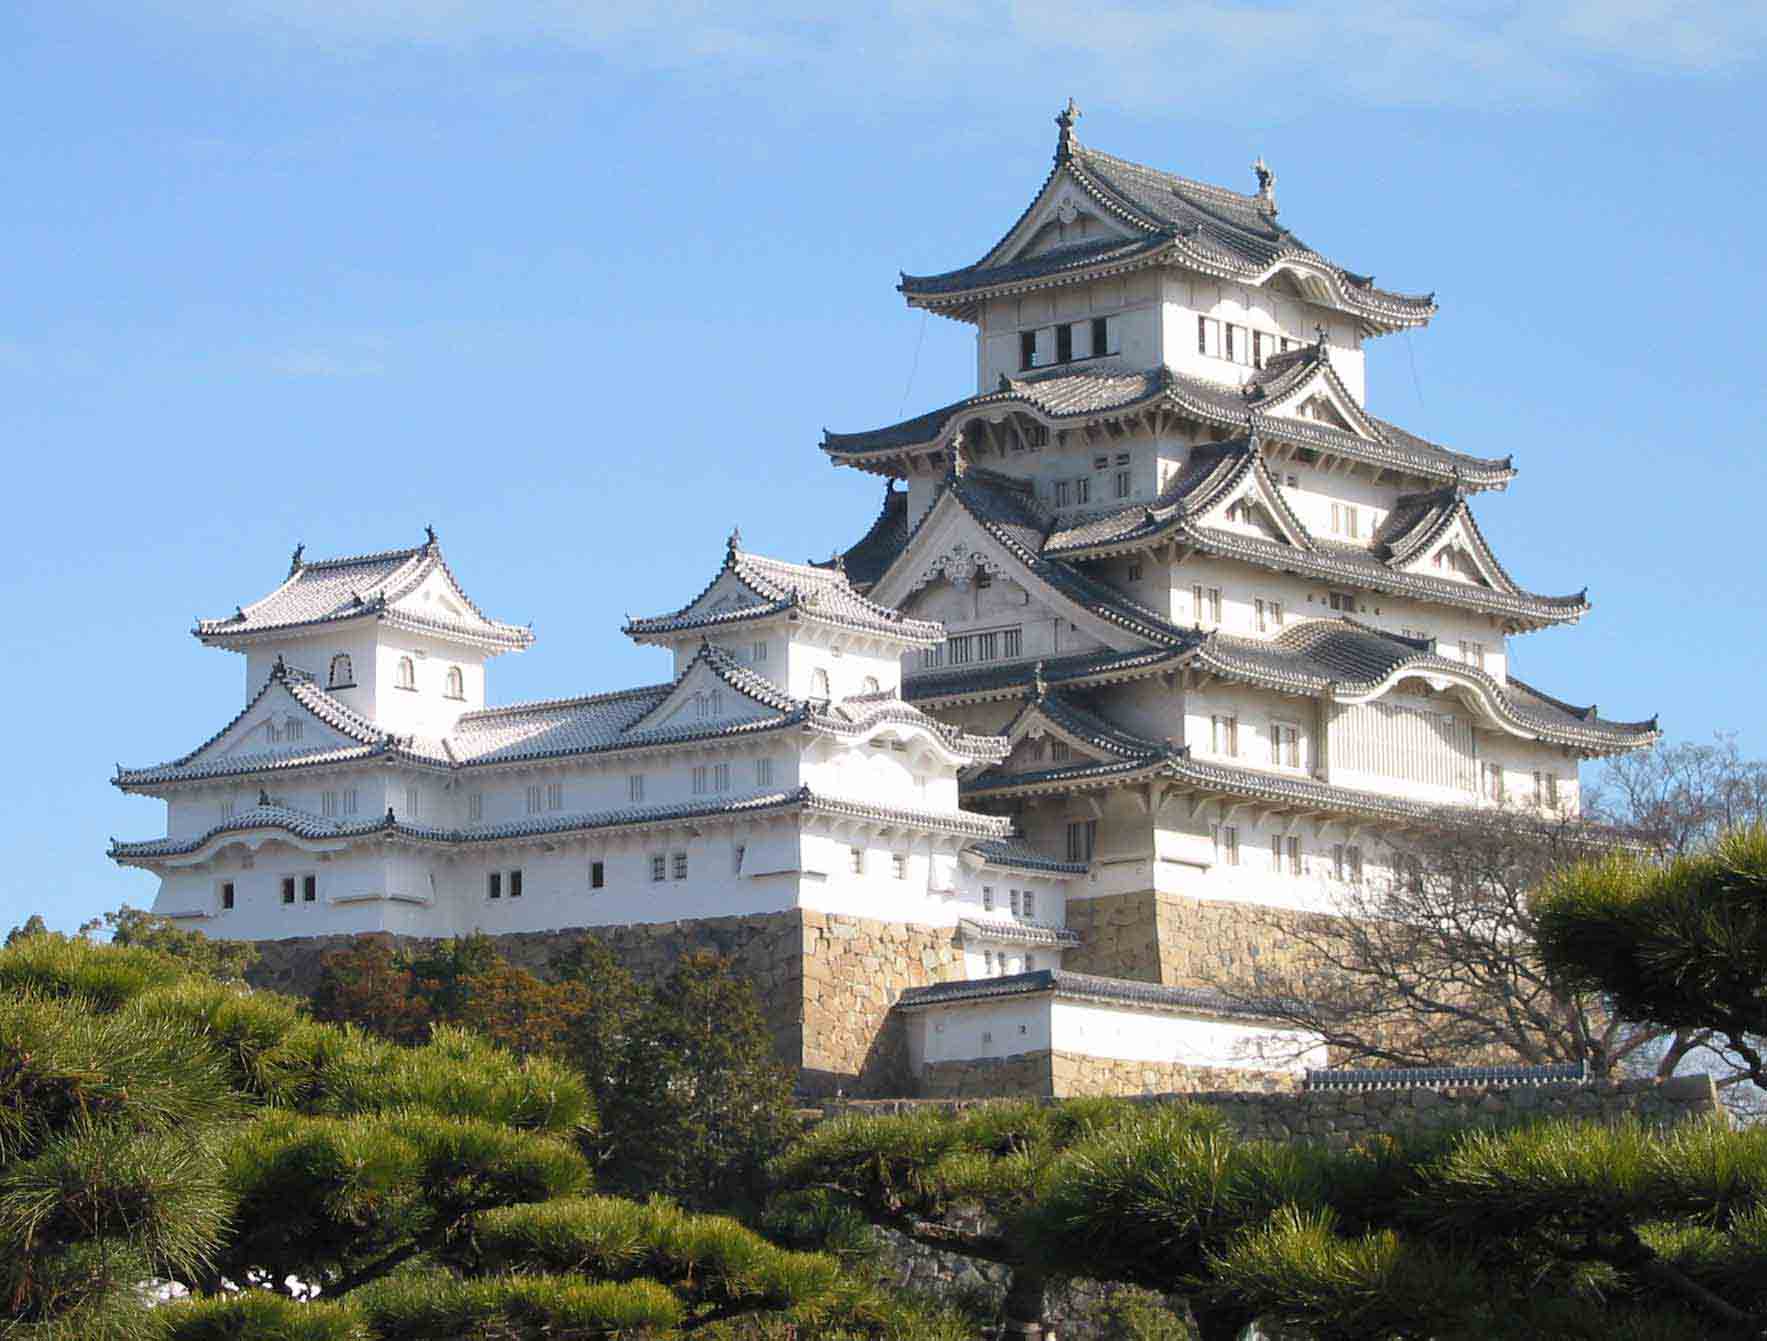 1600: The Tokugawa Shoguns – Builders of the Largest Castle in Japan